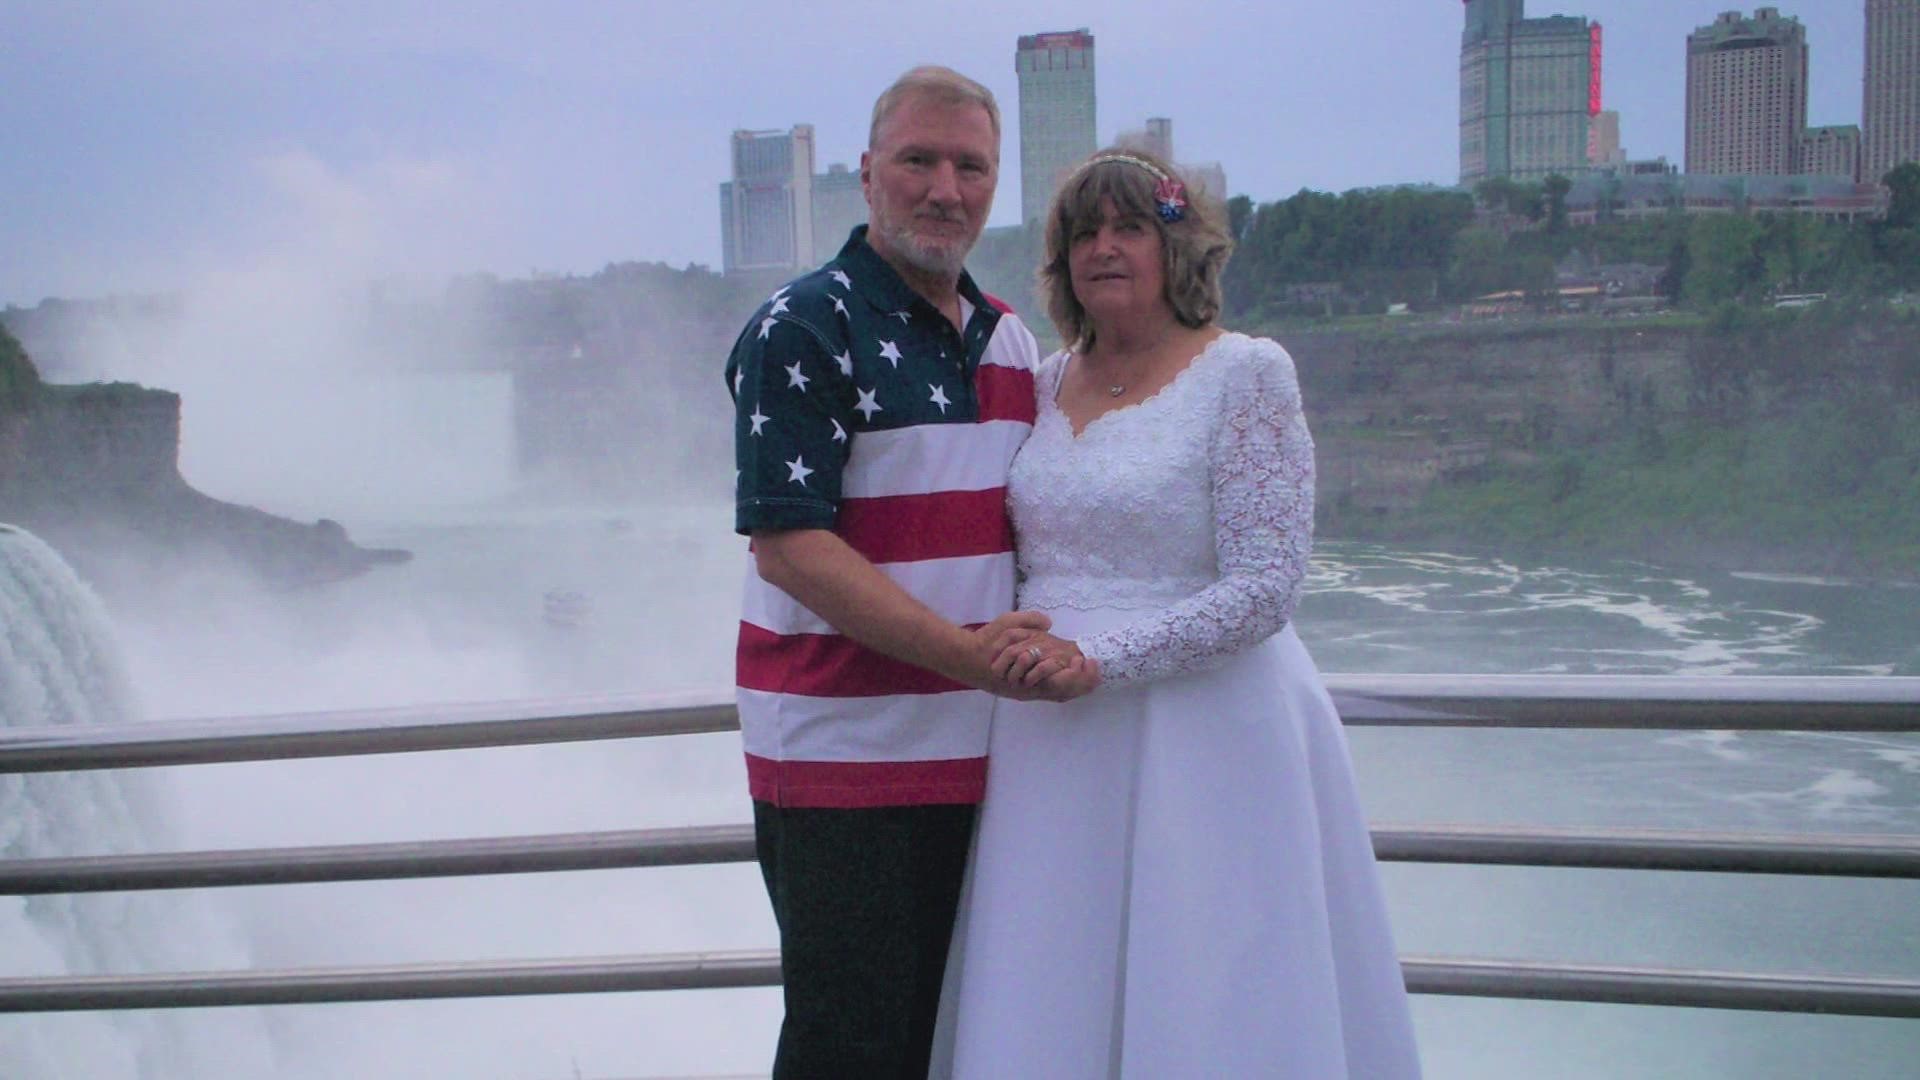 Sandy and Bucky Delano spent eight years traveling to every U.S. state to renew their vows, becoming even closer along the way